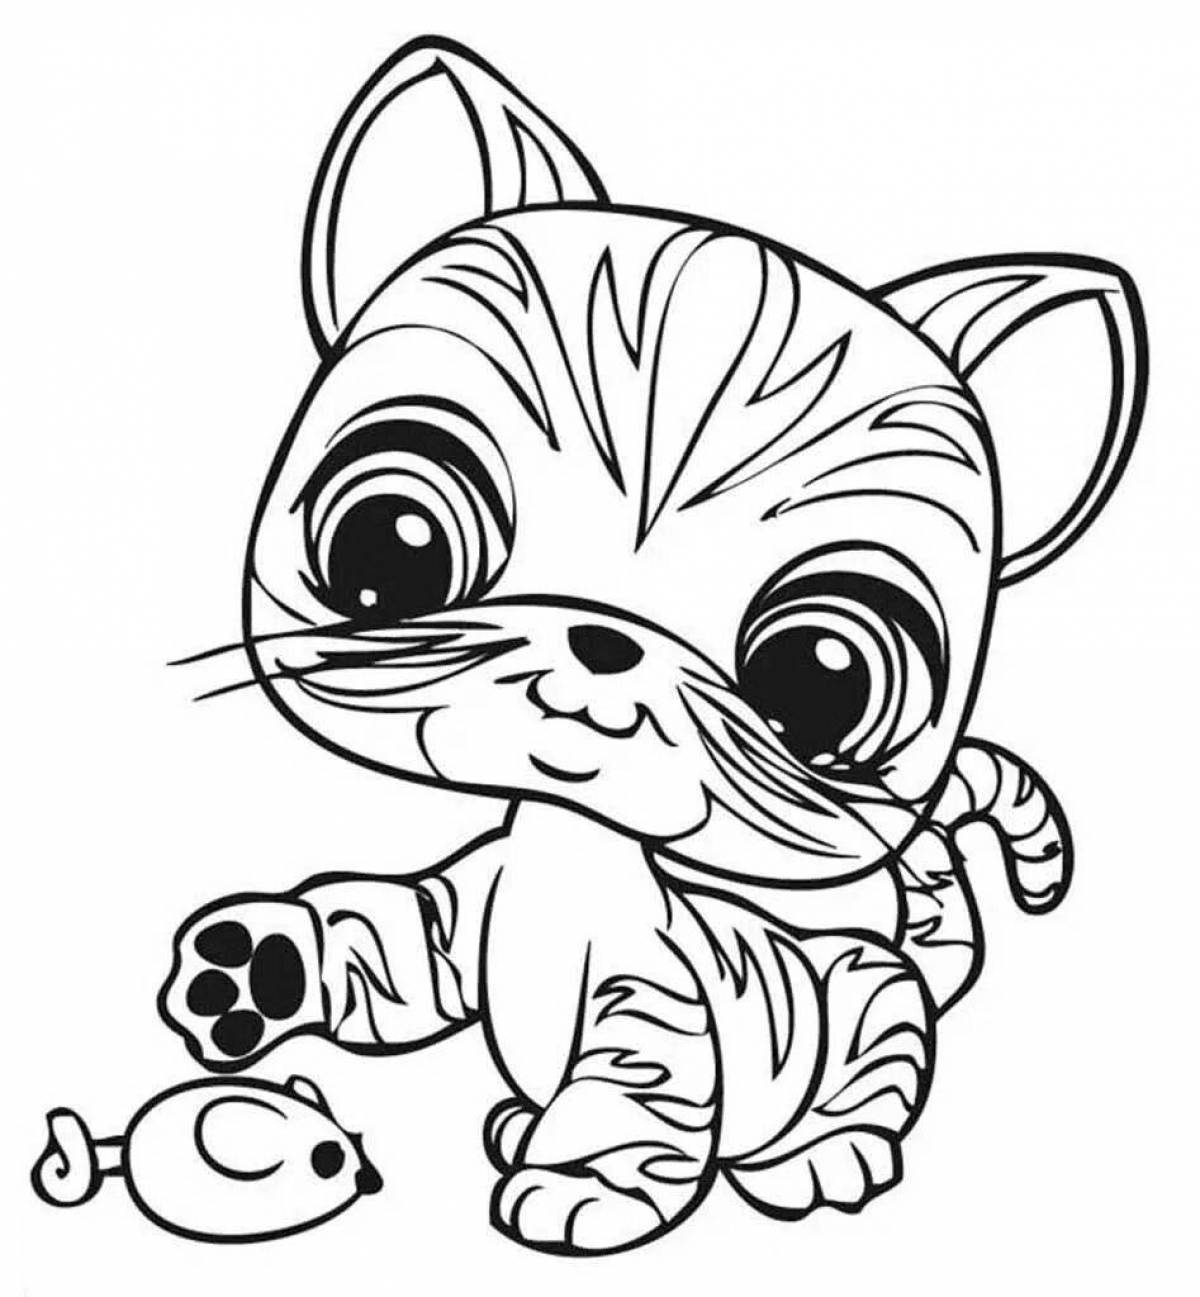 Coloring page adorable little cute kittens